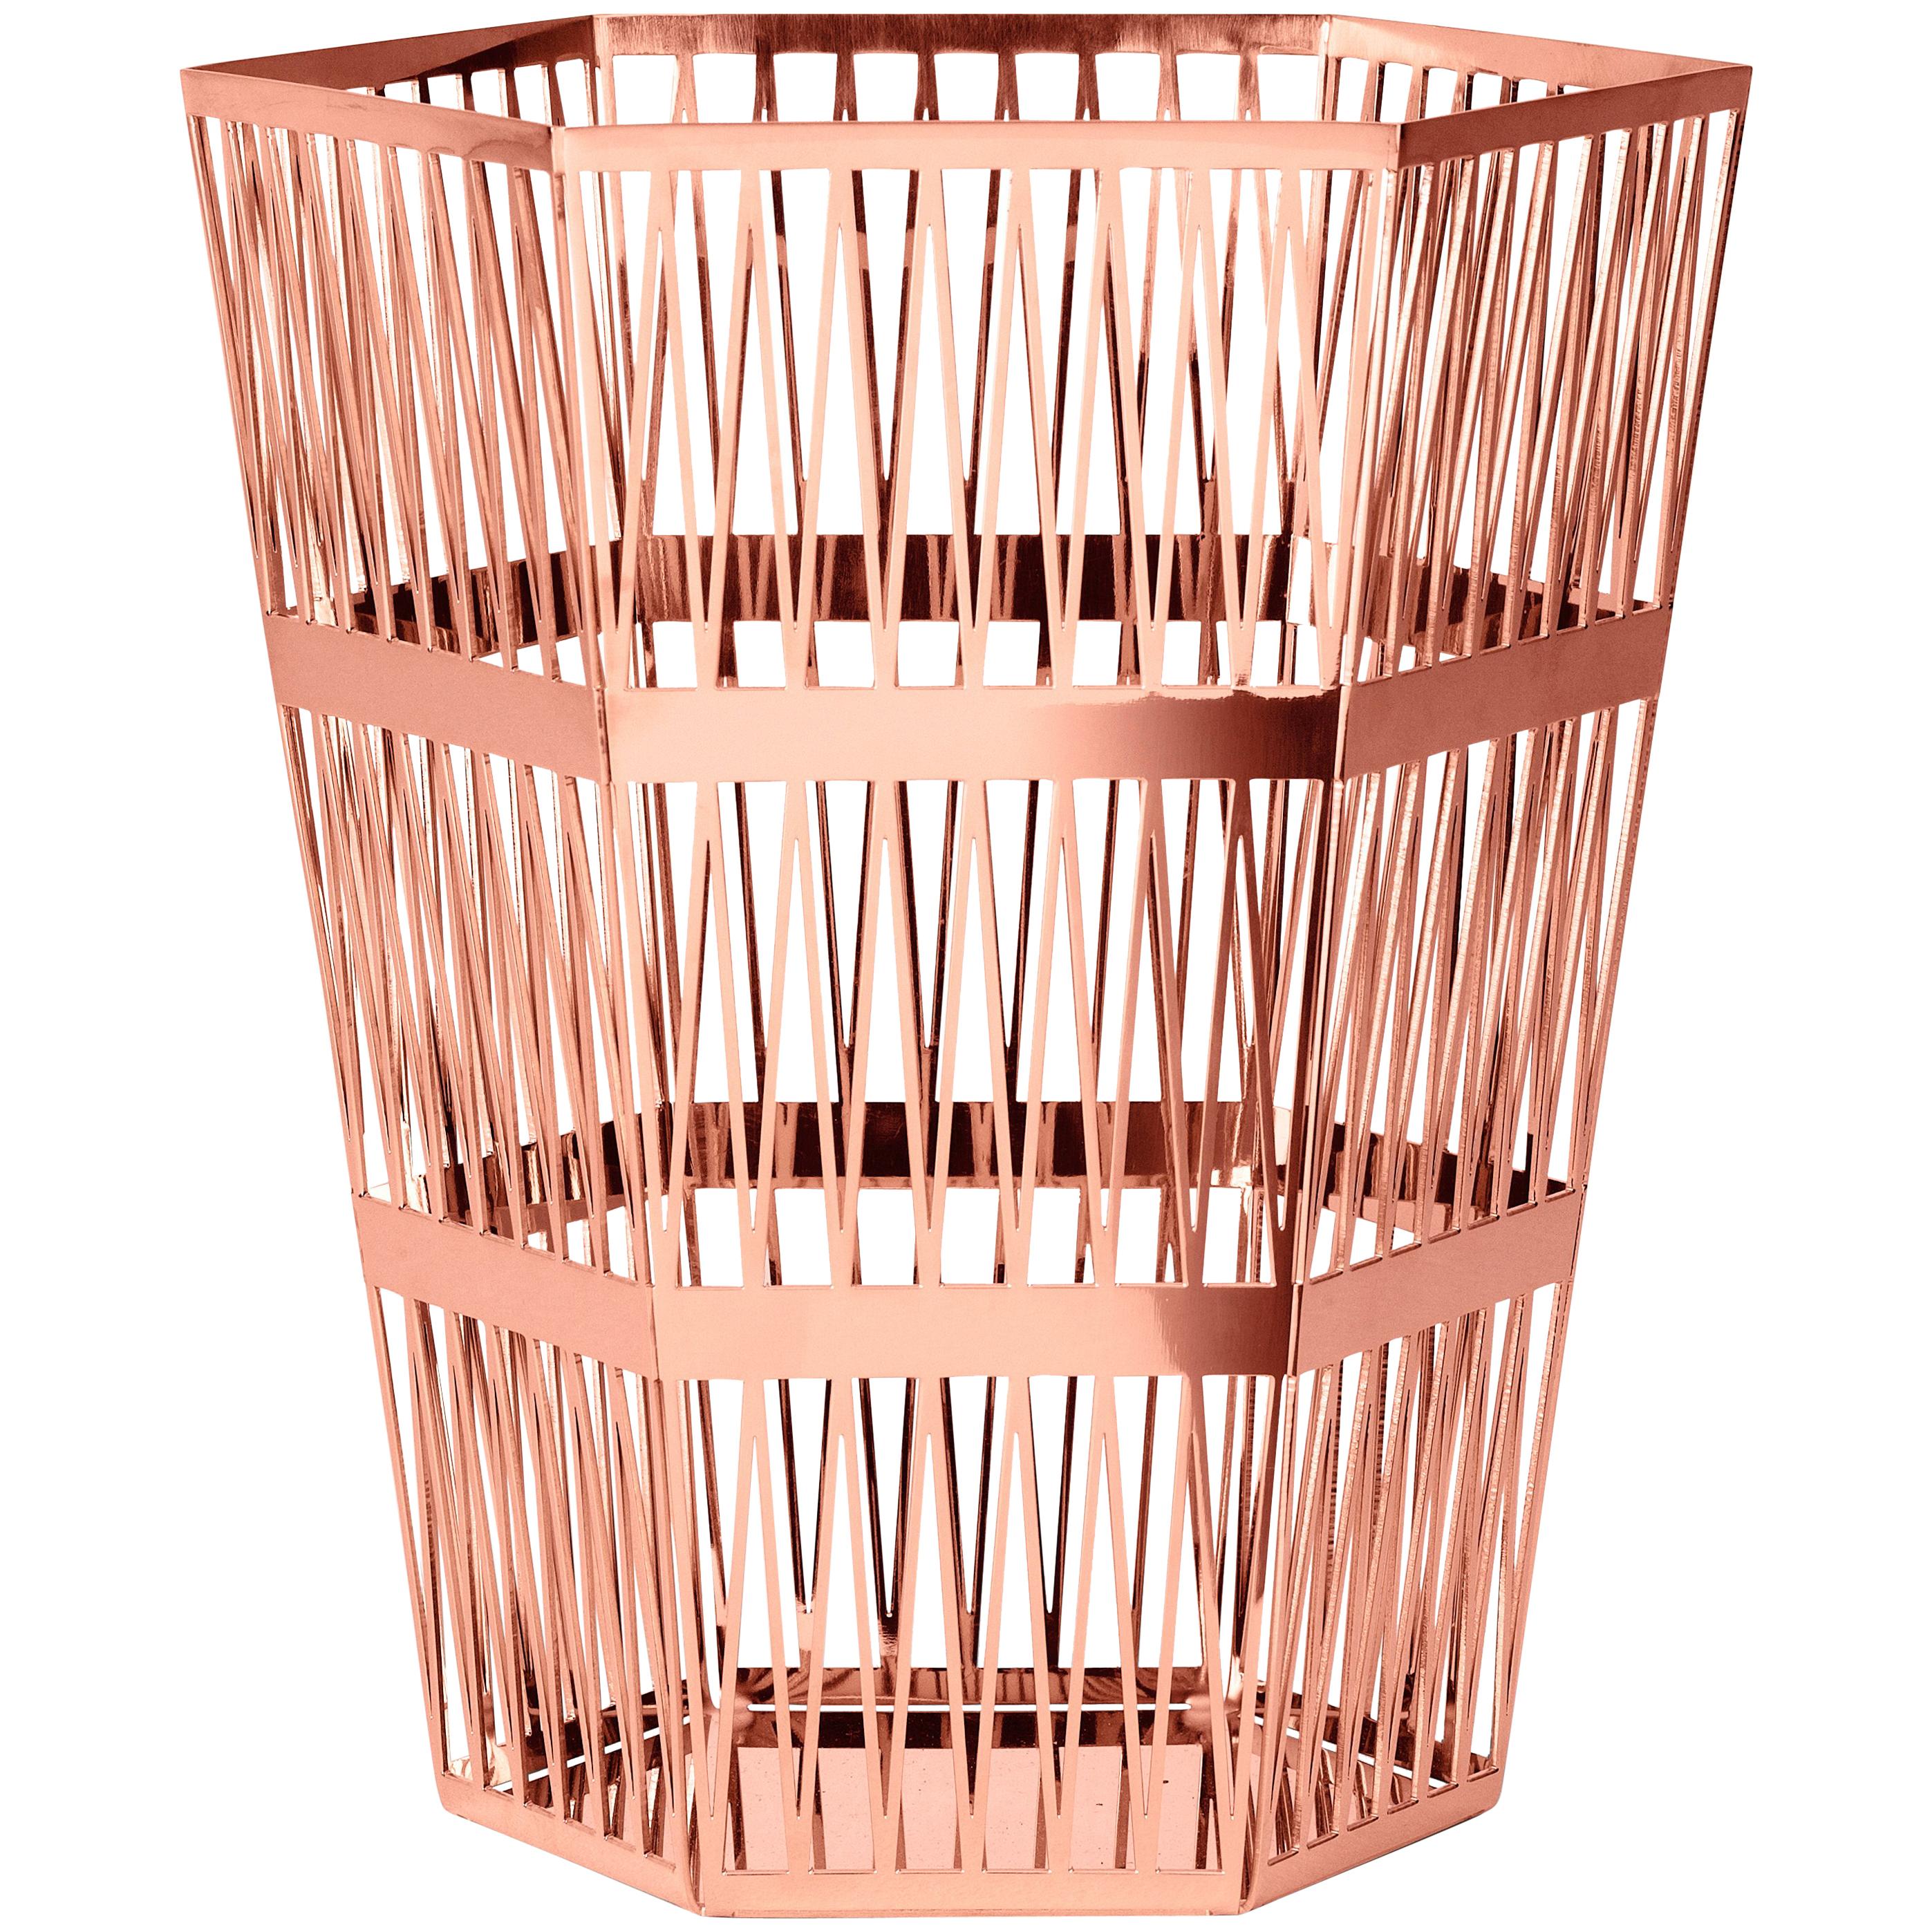 Ghidini 1961 Tip Top Large Paper Basket in Rose Gold by Richard Hutten